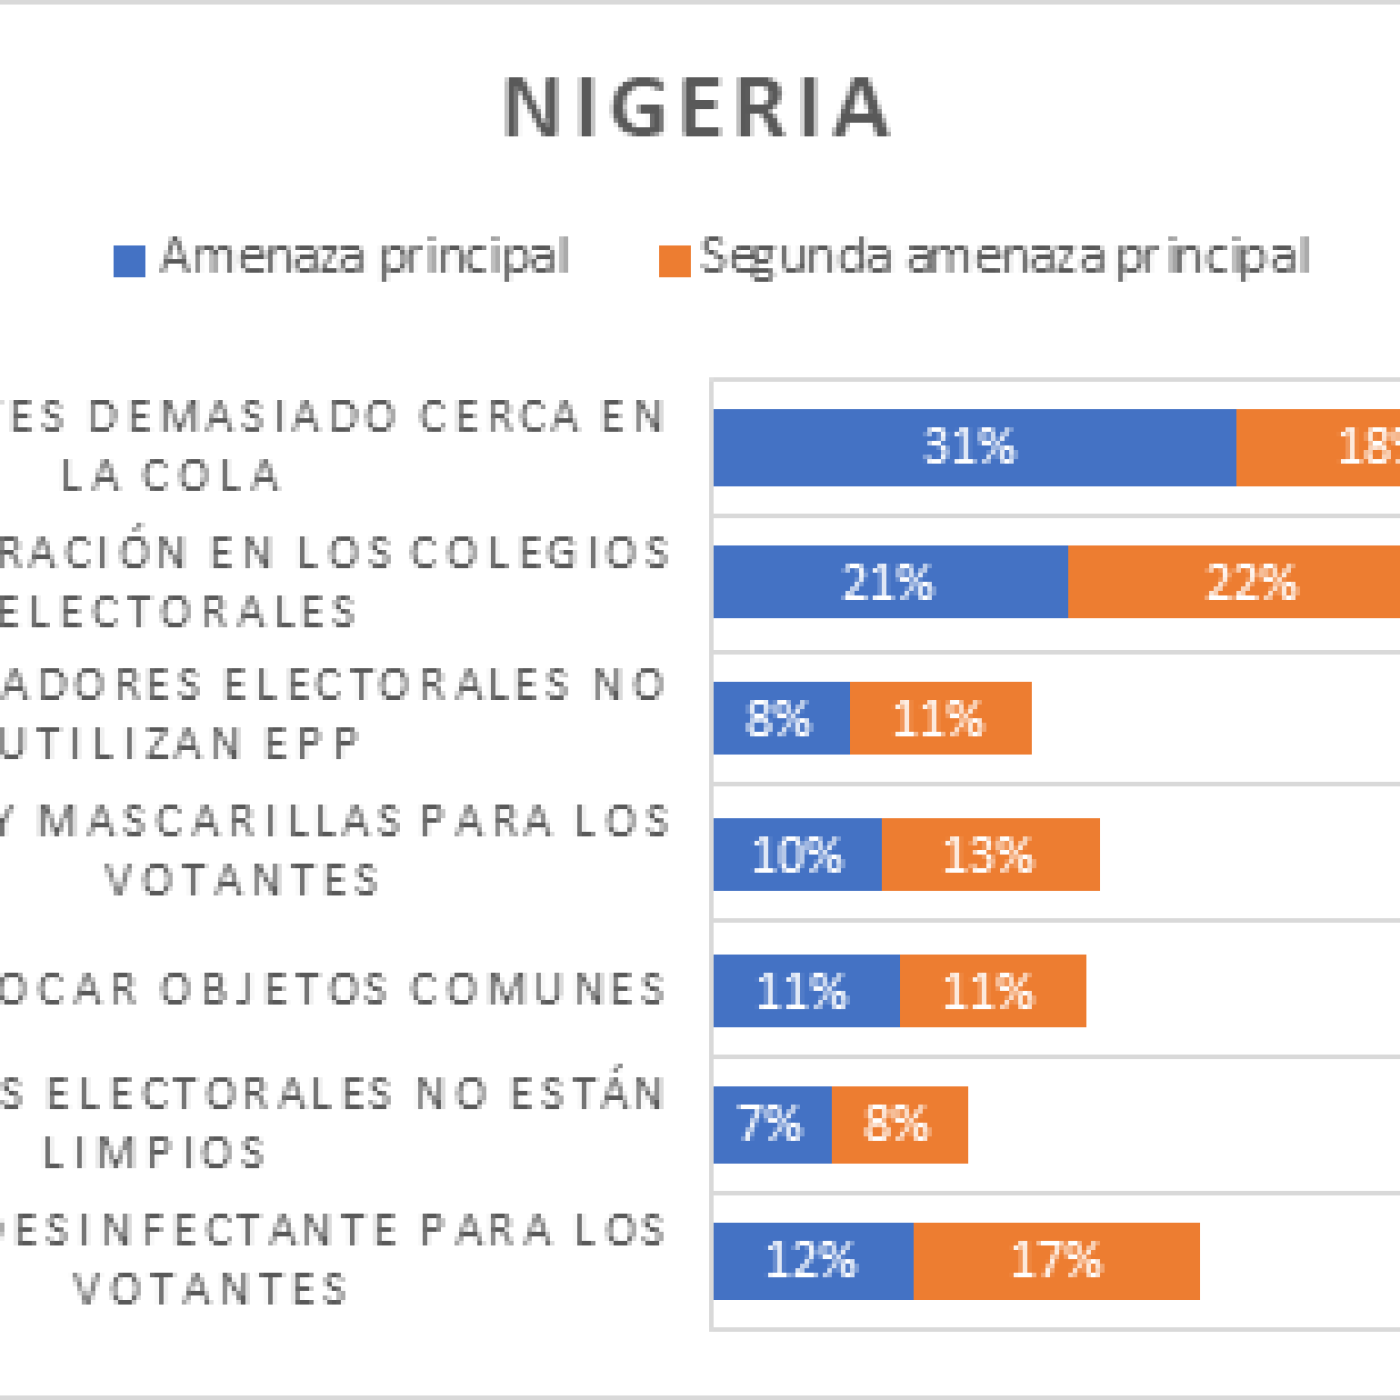 Chart depicting voters' concerns in Nigeria